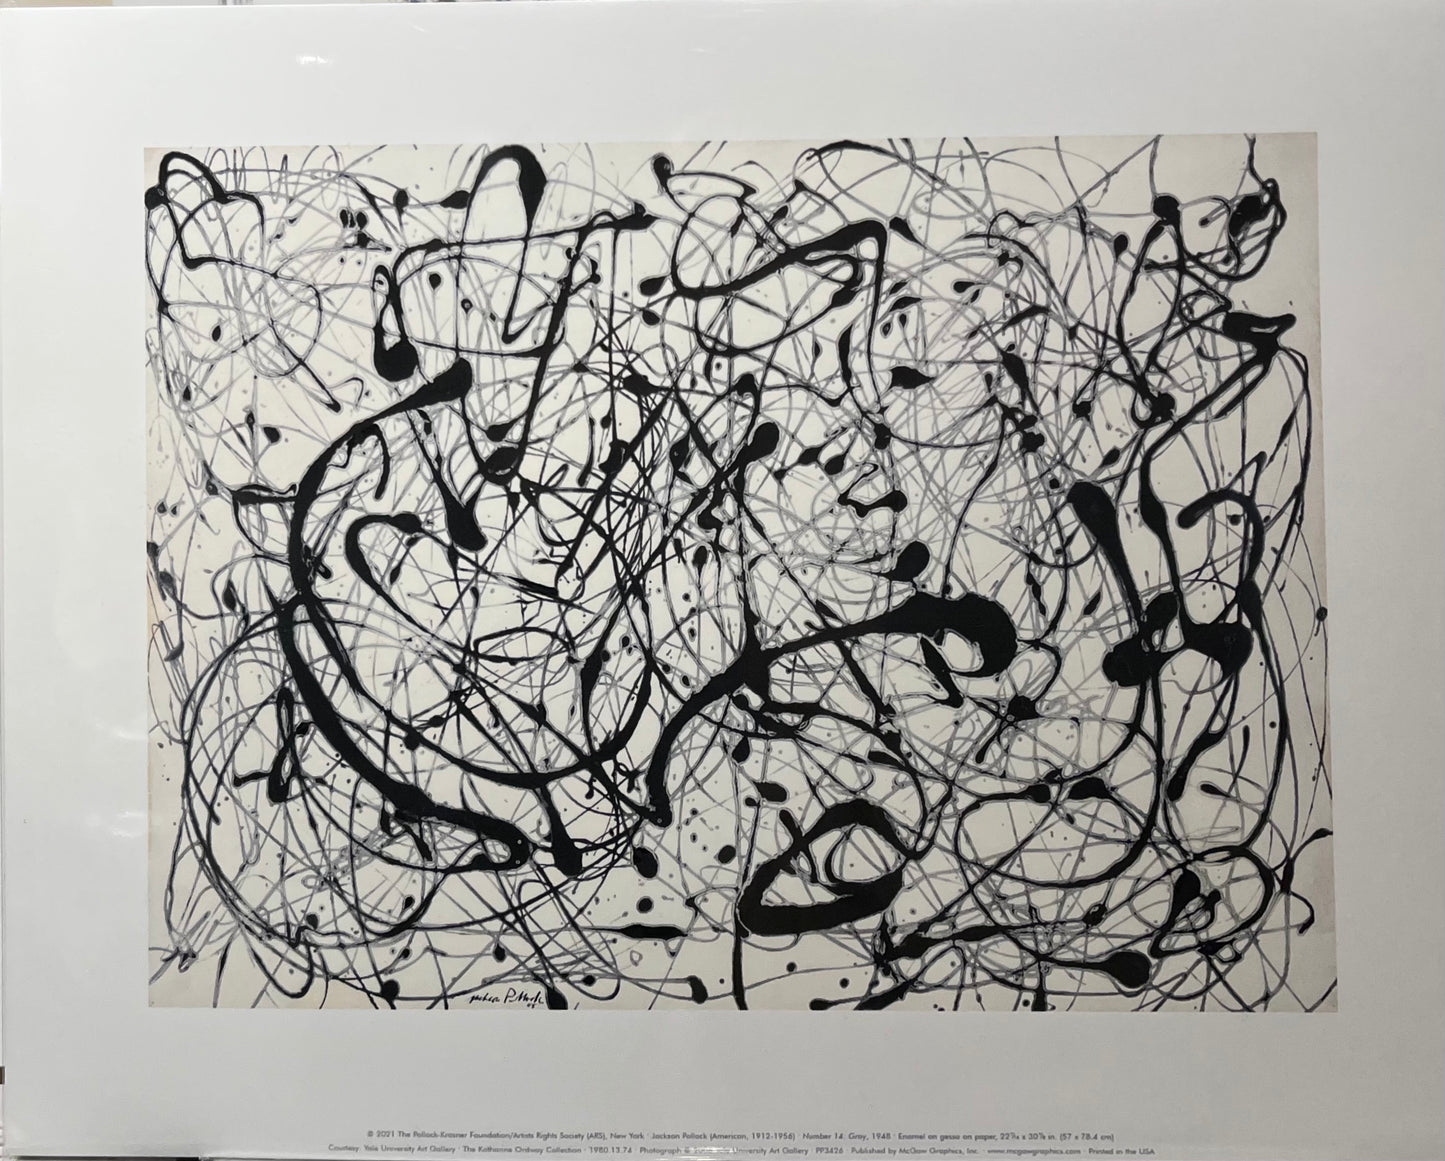 Jackson Pollock, Set of 3 Official Offset Lithographs